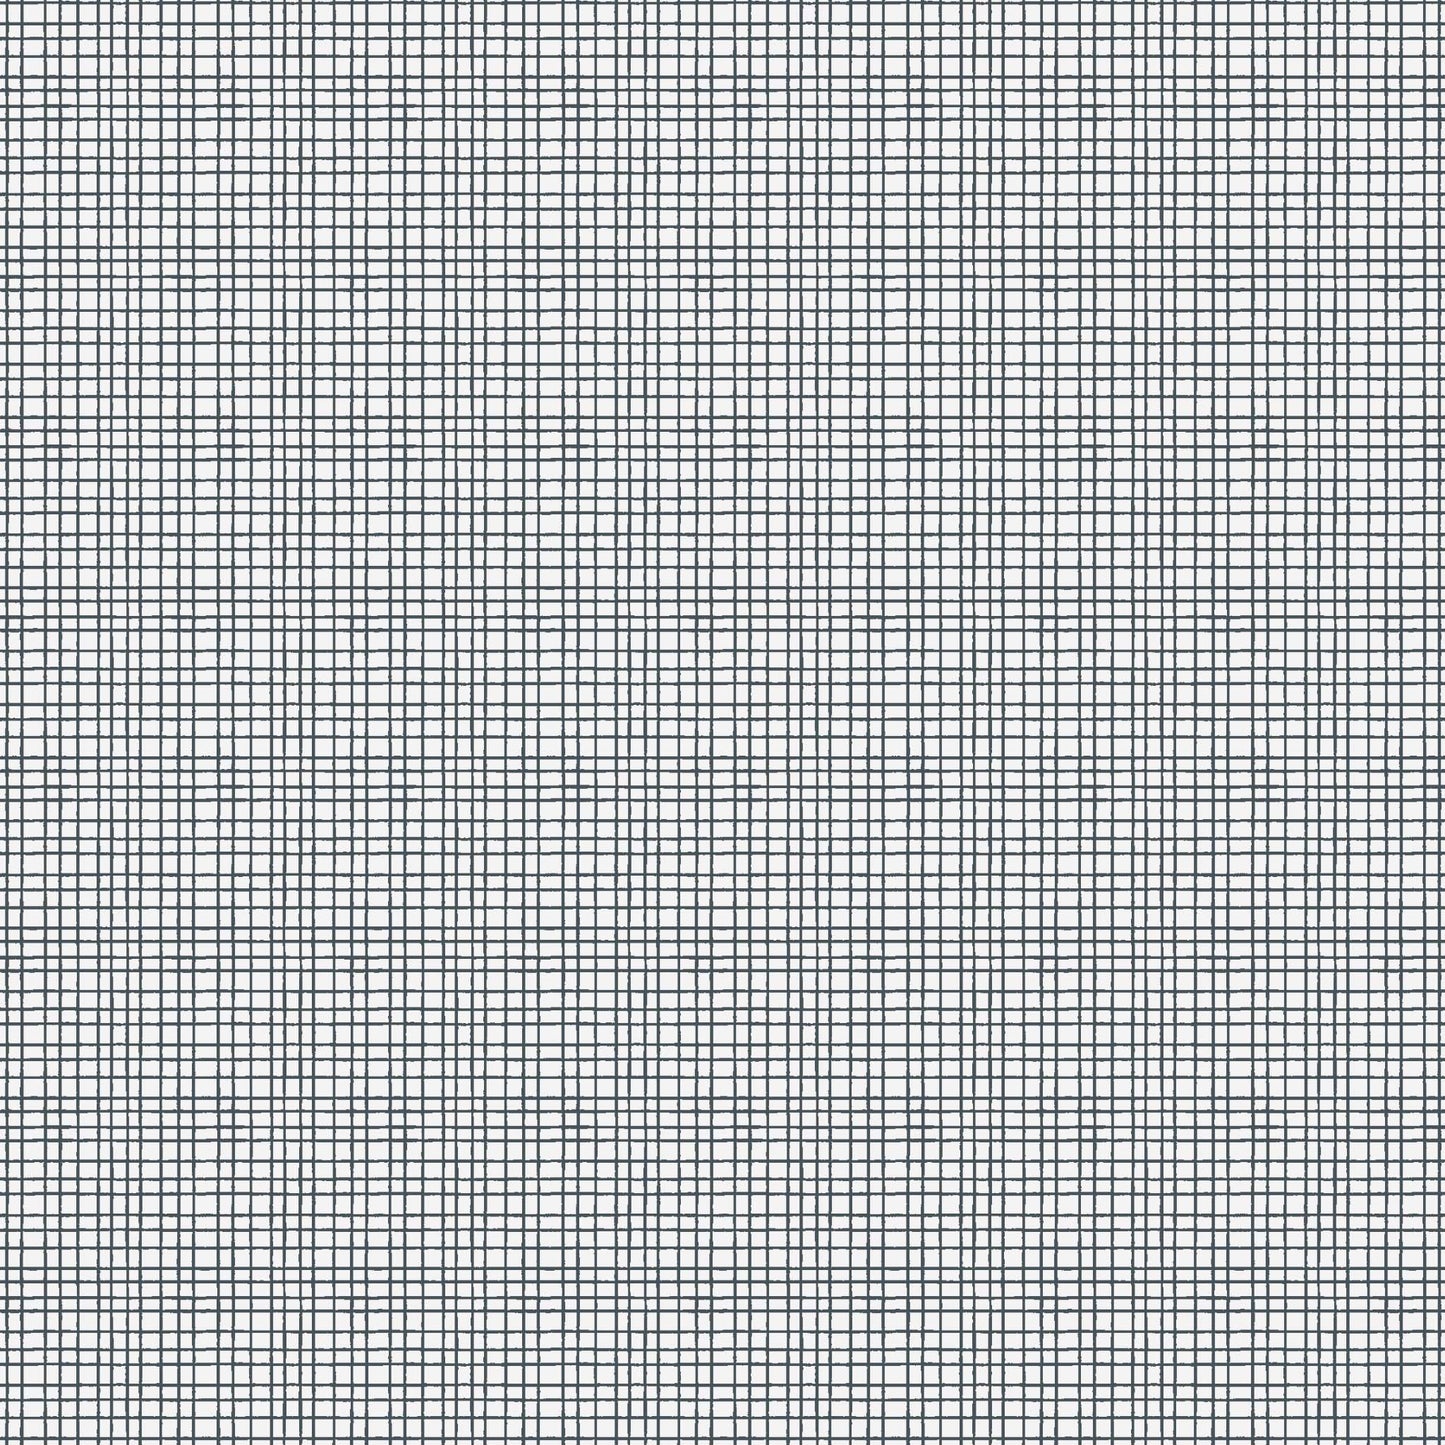 Tweed Wallpaper - White and Navy